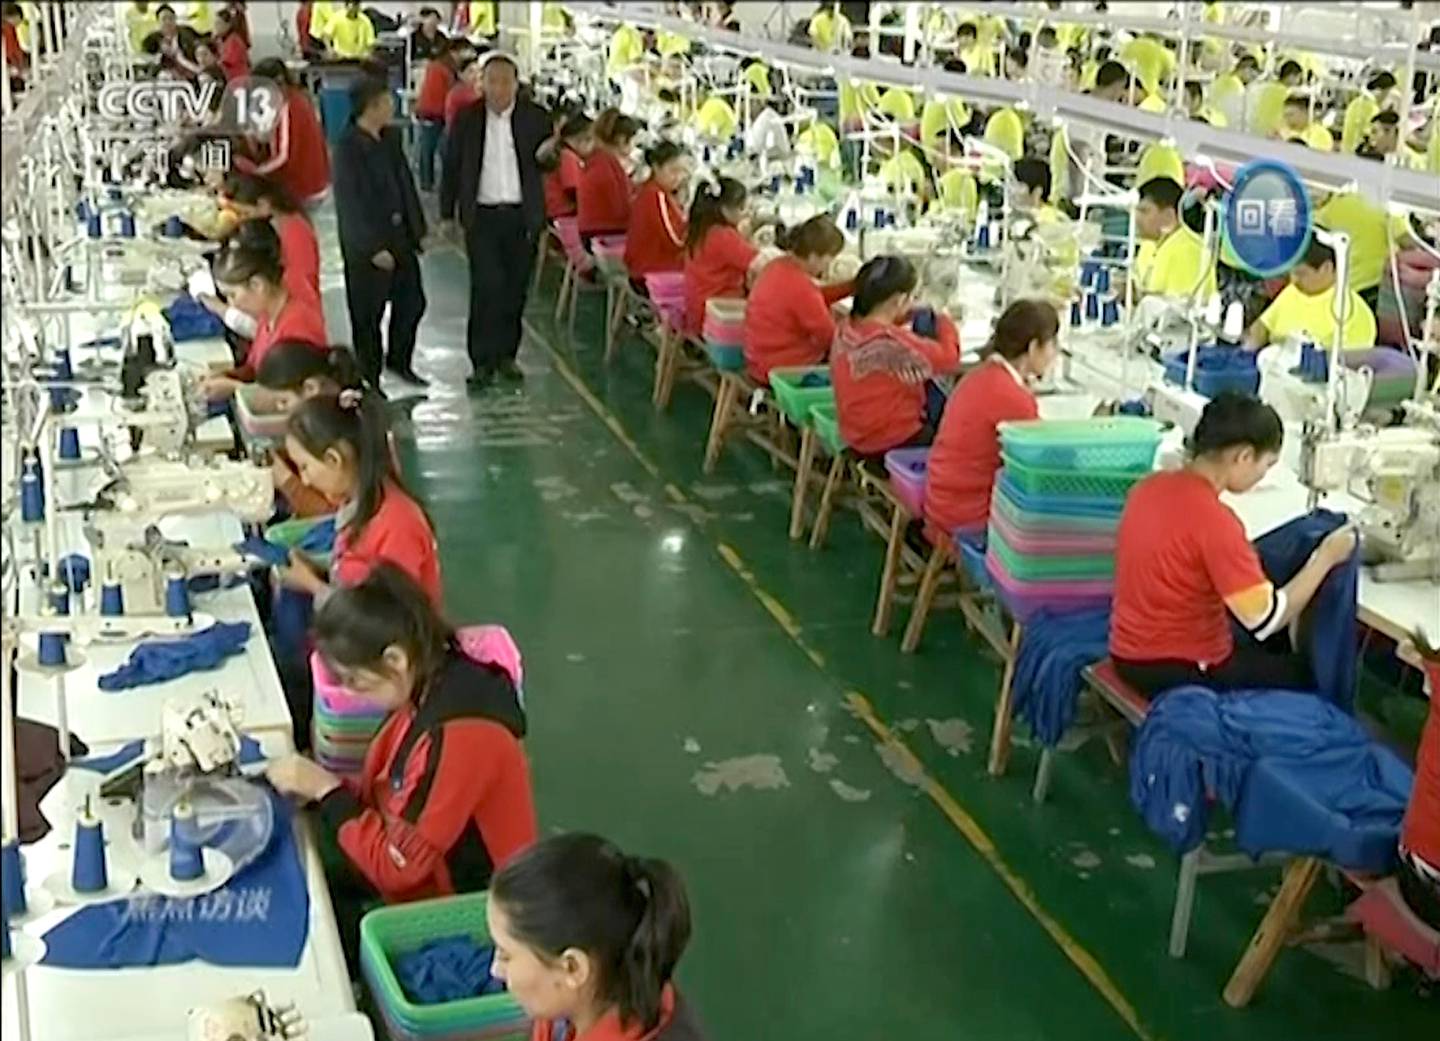 FILE - In this image made from undated, file video footage run by China's CCTV via AP Video, Muslim trainees work in a garment factory at the Hotan Vocational Education and Training Center in Hotan, Xinjiang, northwest China. China on Tuesday, Sept. 22, 2020, lashed out at the passage of a bill by the U.S. House of Representatives that threatens sanctions over the alleged use of forced labor in Chinas Xinjiang region, calling the accusation a lie. (CCTV via AP Video, File)